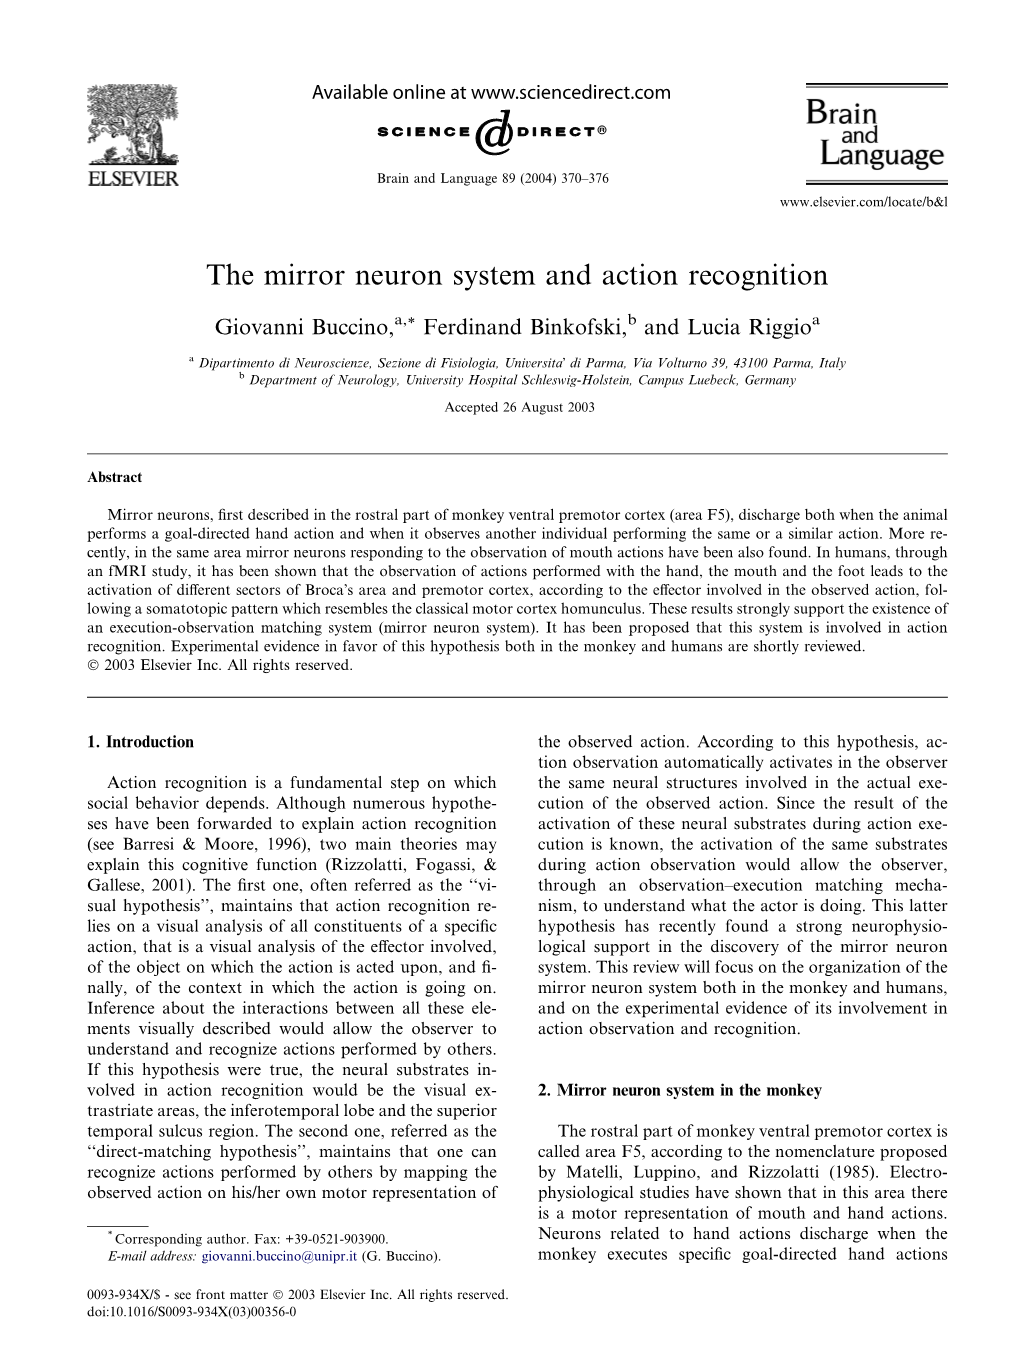 The Mirror Neuron System and Action Recognition